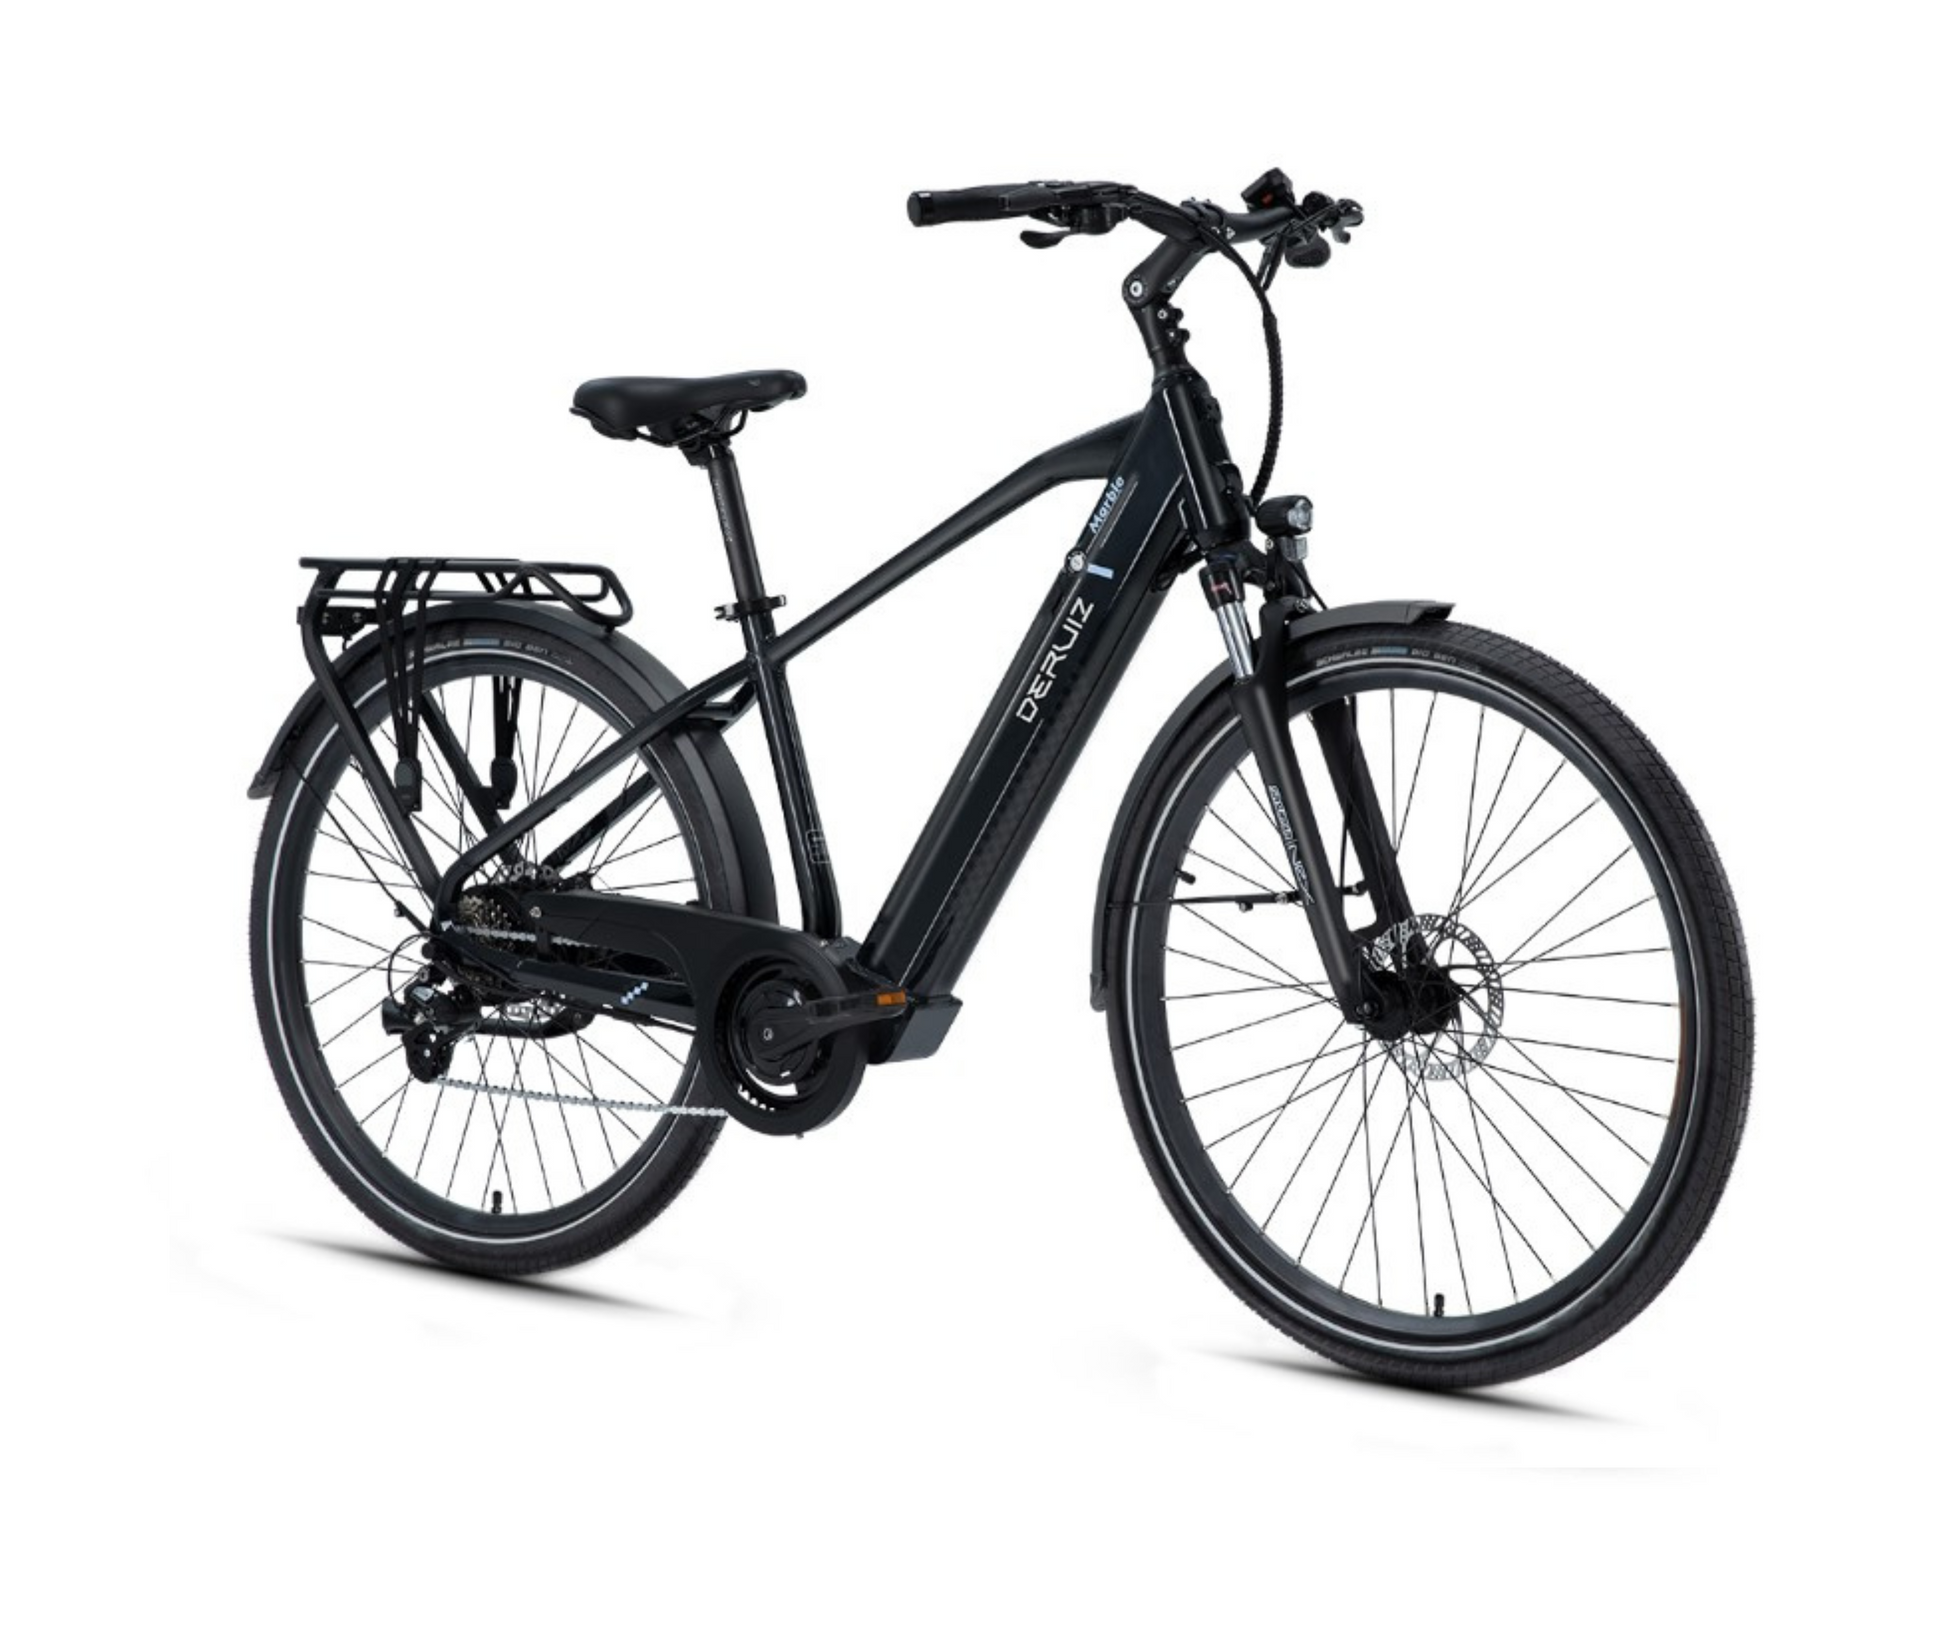 Angled view of the Deruiz Marble electric bicycle displaying its robust tires and rear cargo rack, perfect for urban cyclists.